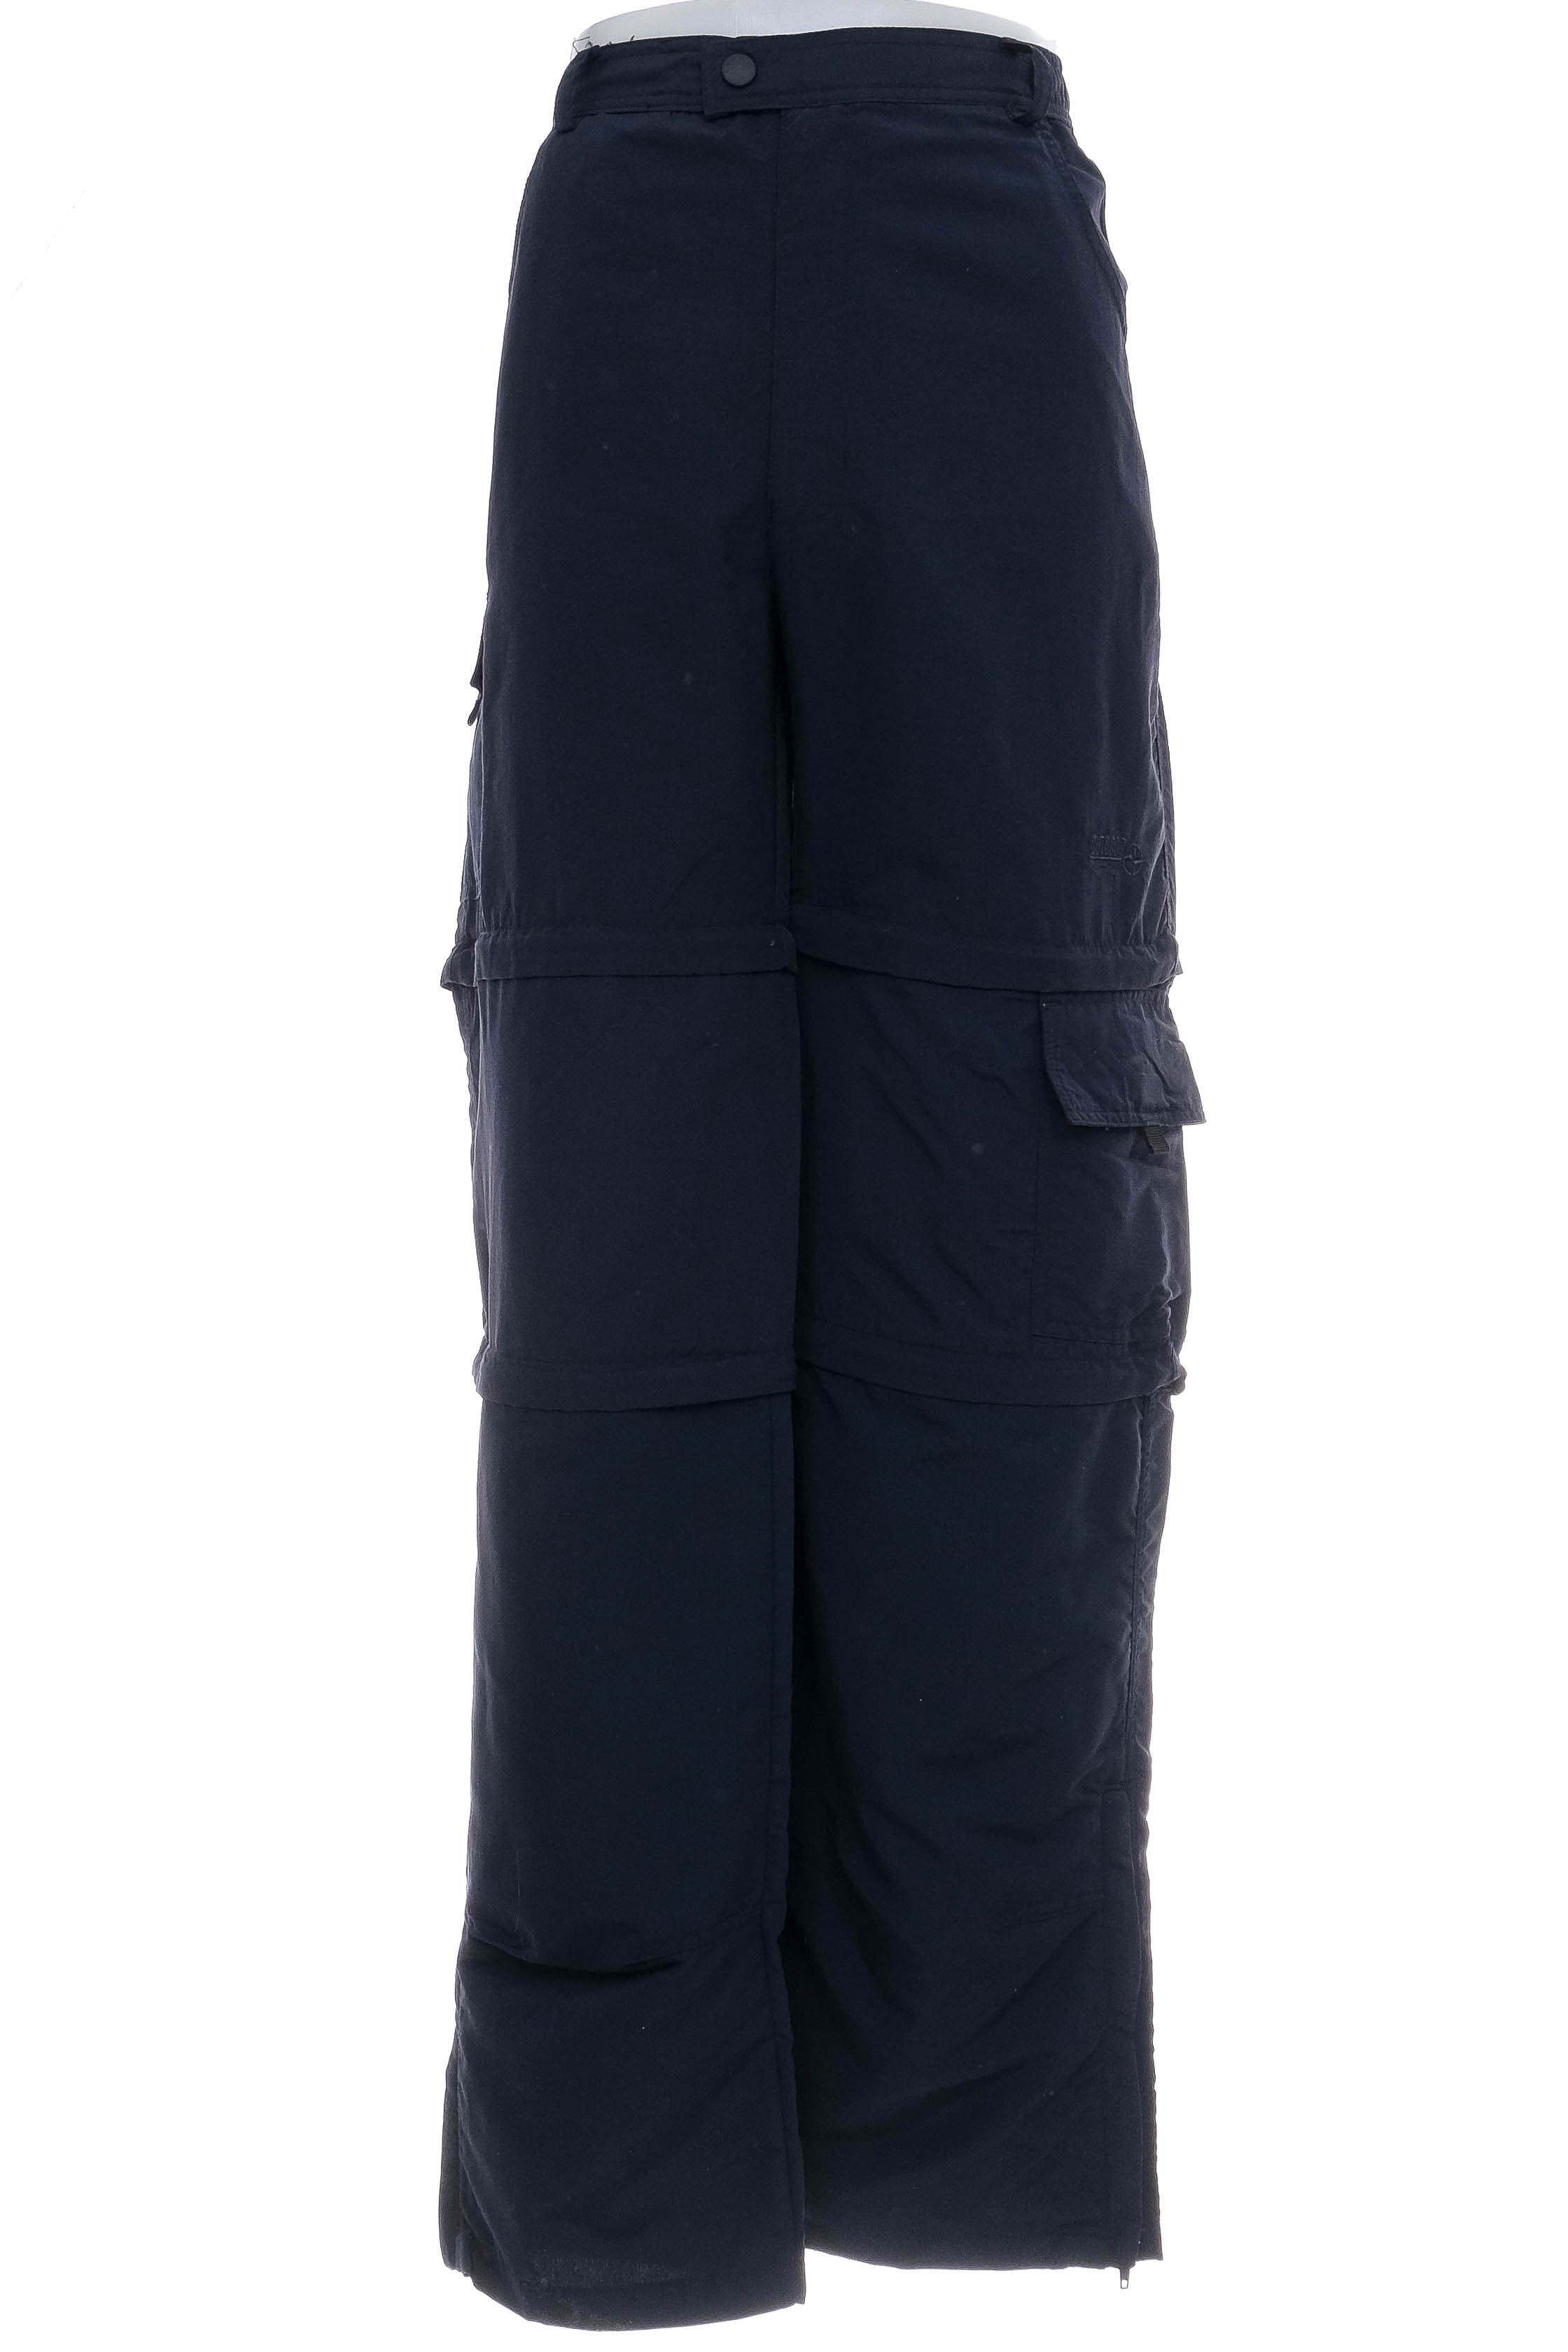 Men's trousers - Outdoor Discovery - 0